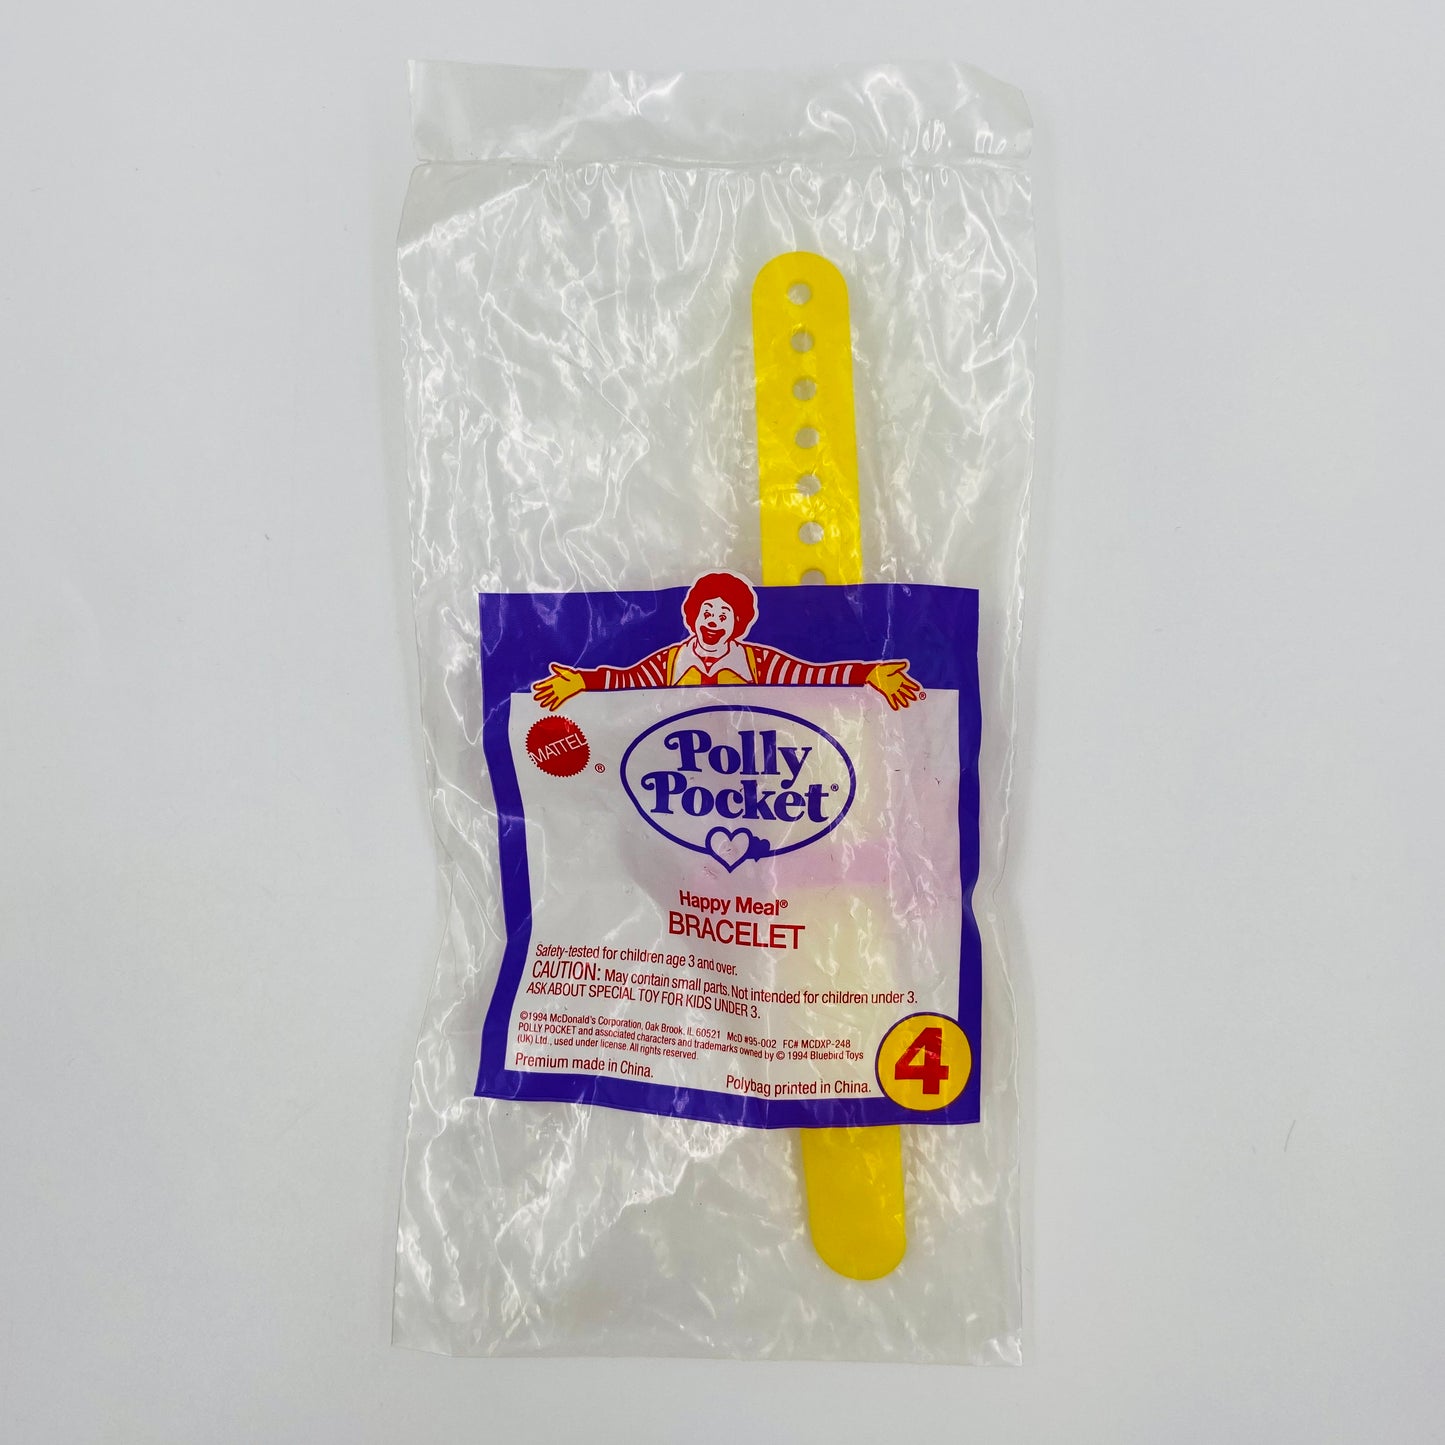 Polly Pocket Bracelet McDonald's Happy Meal toy (1994) bagged